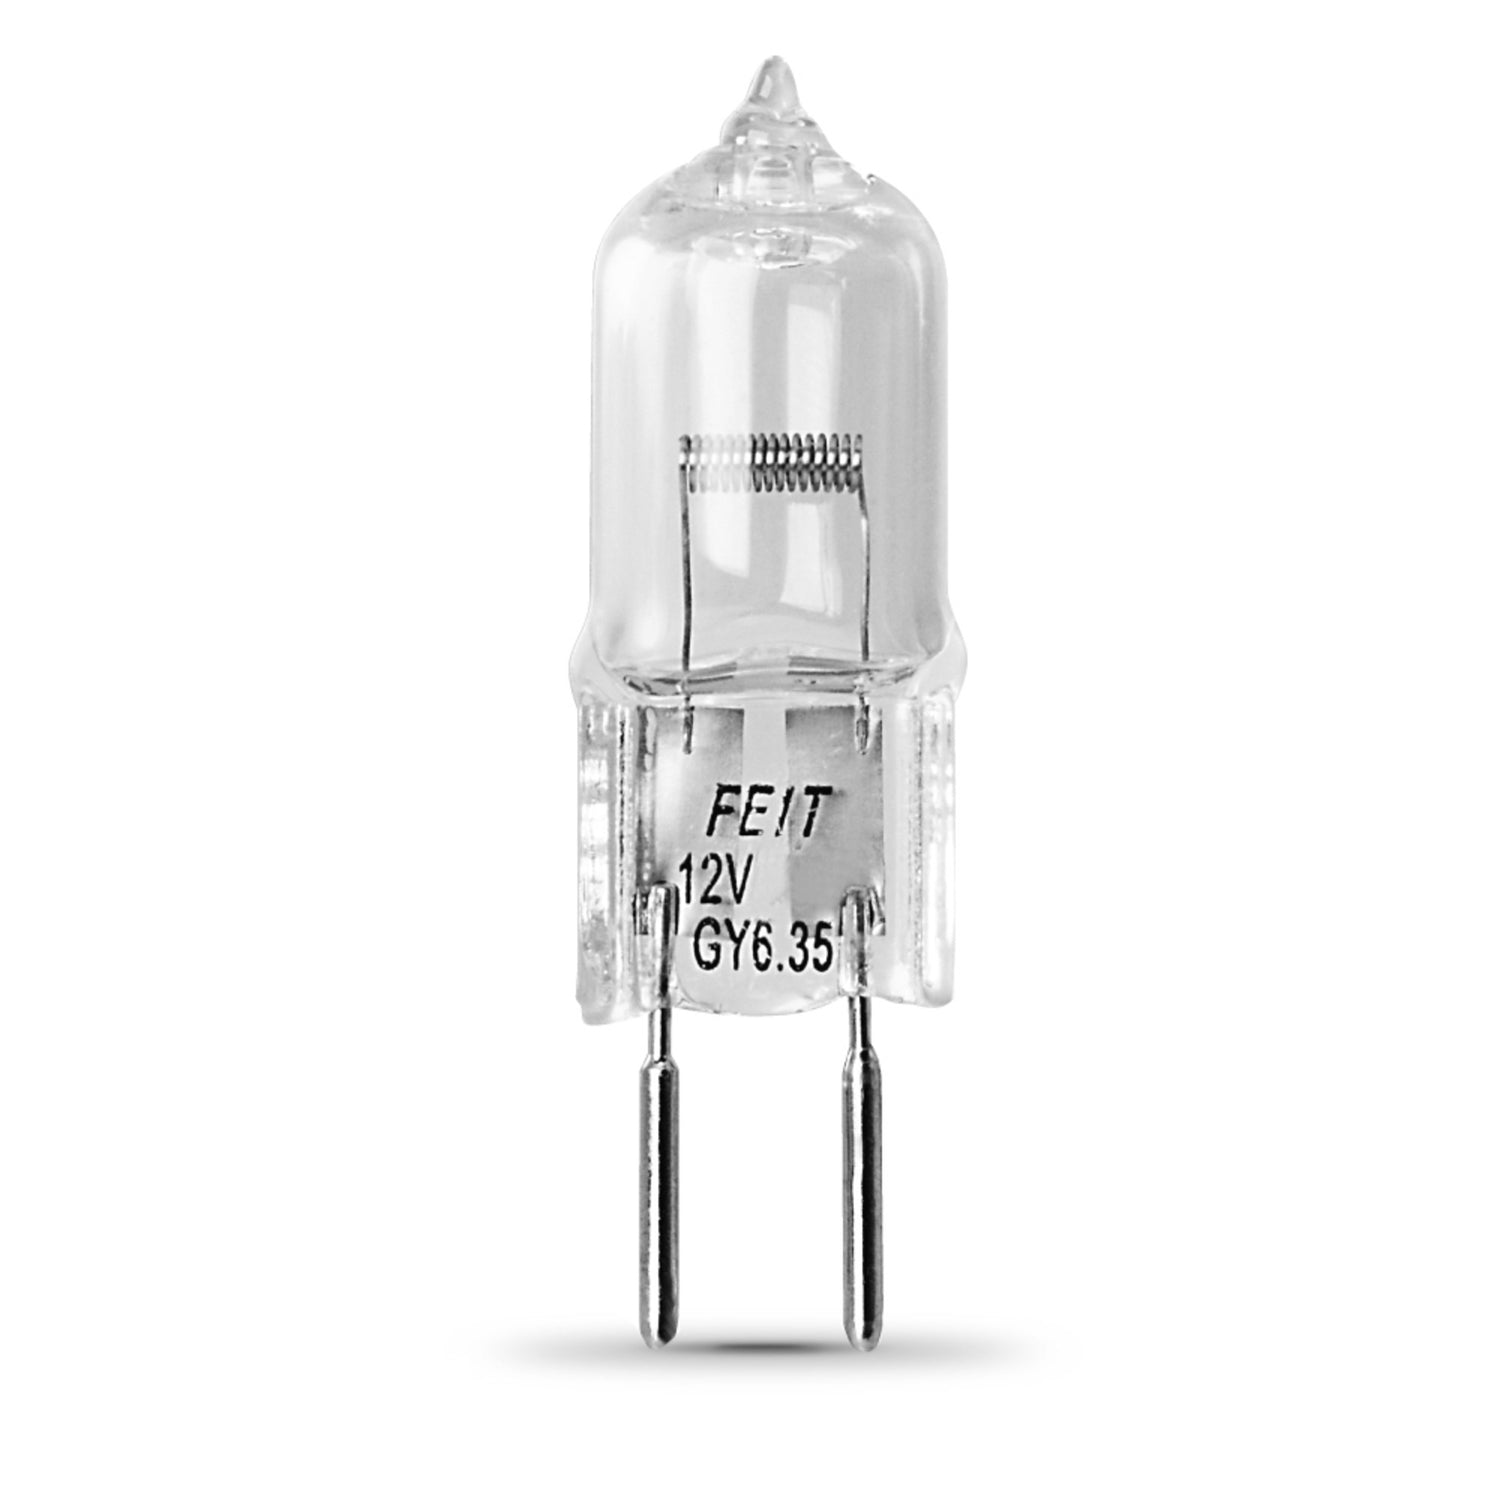 50W Warm White (3000K) Bi-Pin GY6.35 Base (T4 Replacement) Halogen Replacement Light Bulb